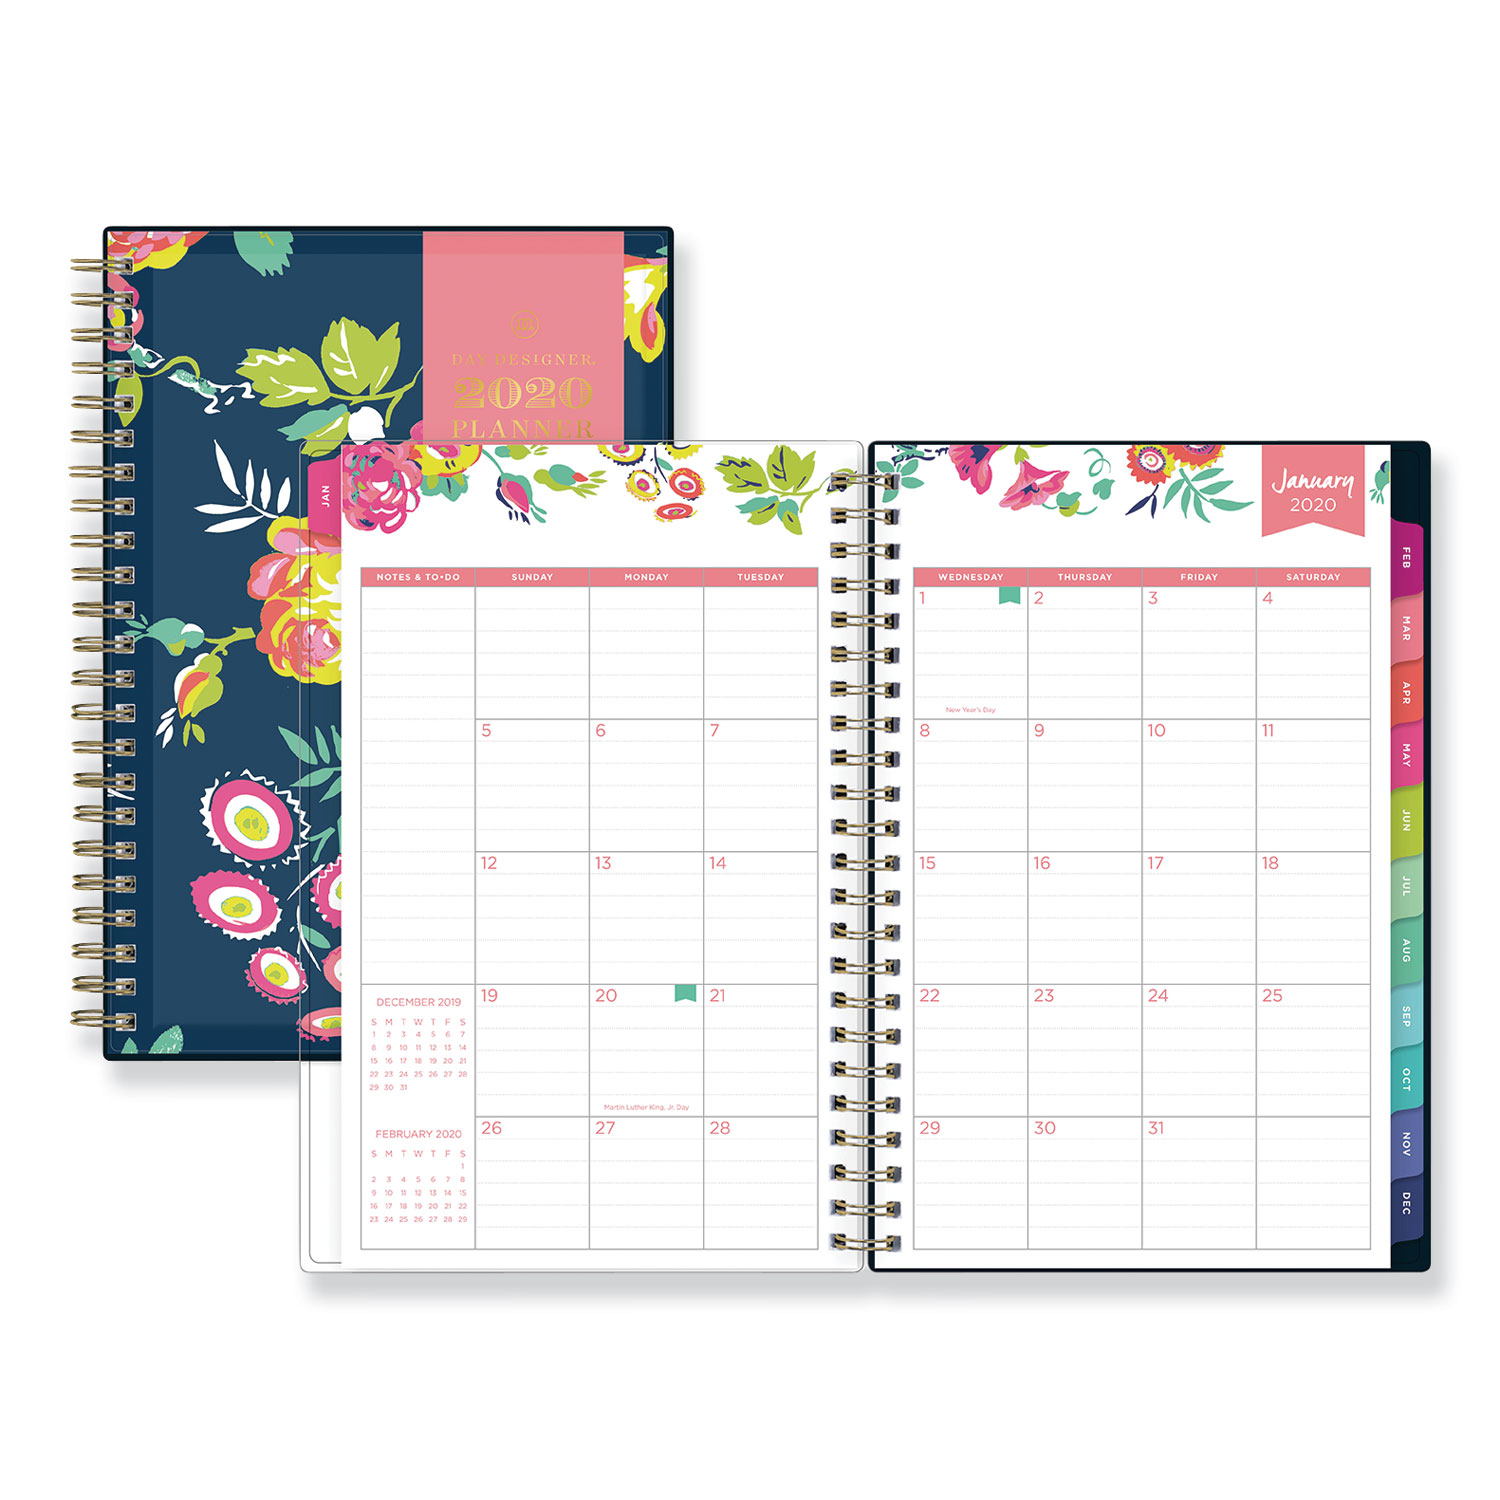  Blue Sky BLS103620 Day Designer CYO Weekly/Monthly Planner, 8 x 5, Navy/Floral, 2020 (BLS103620) 